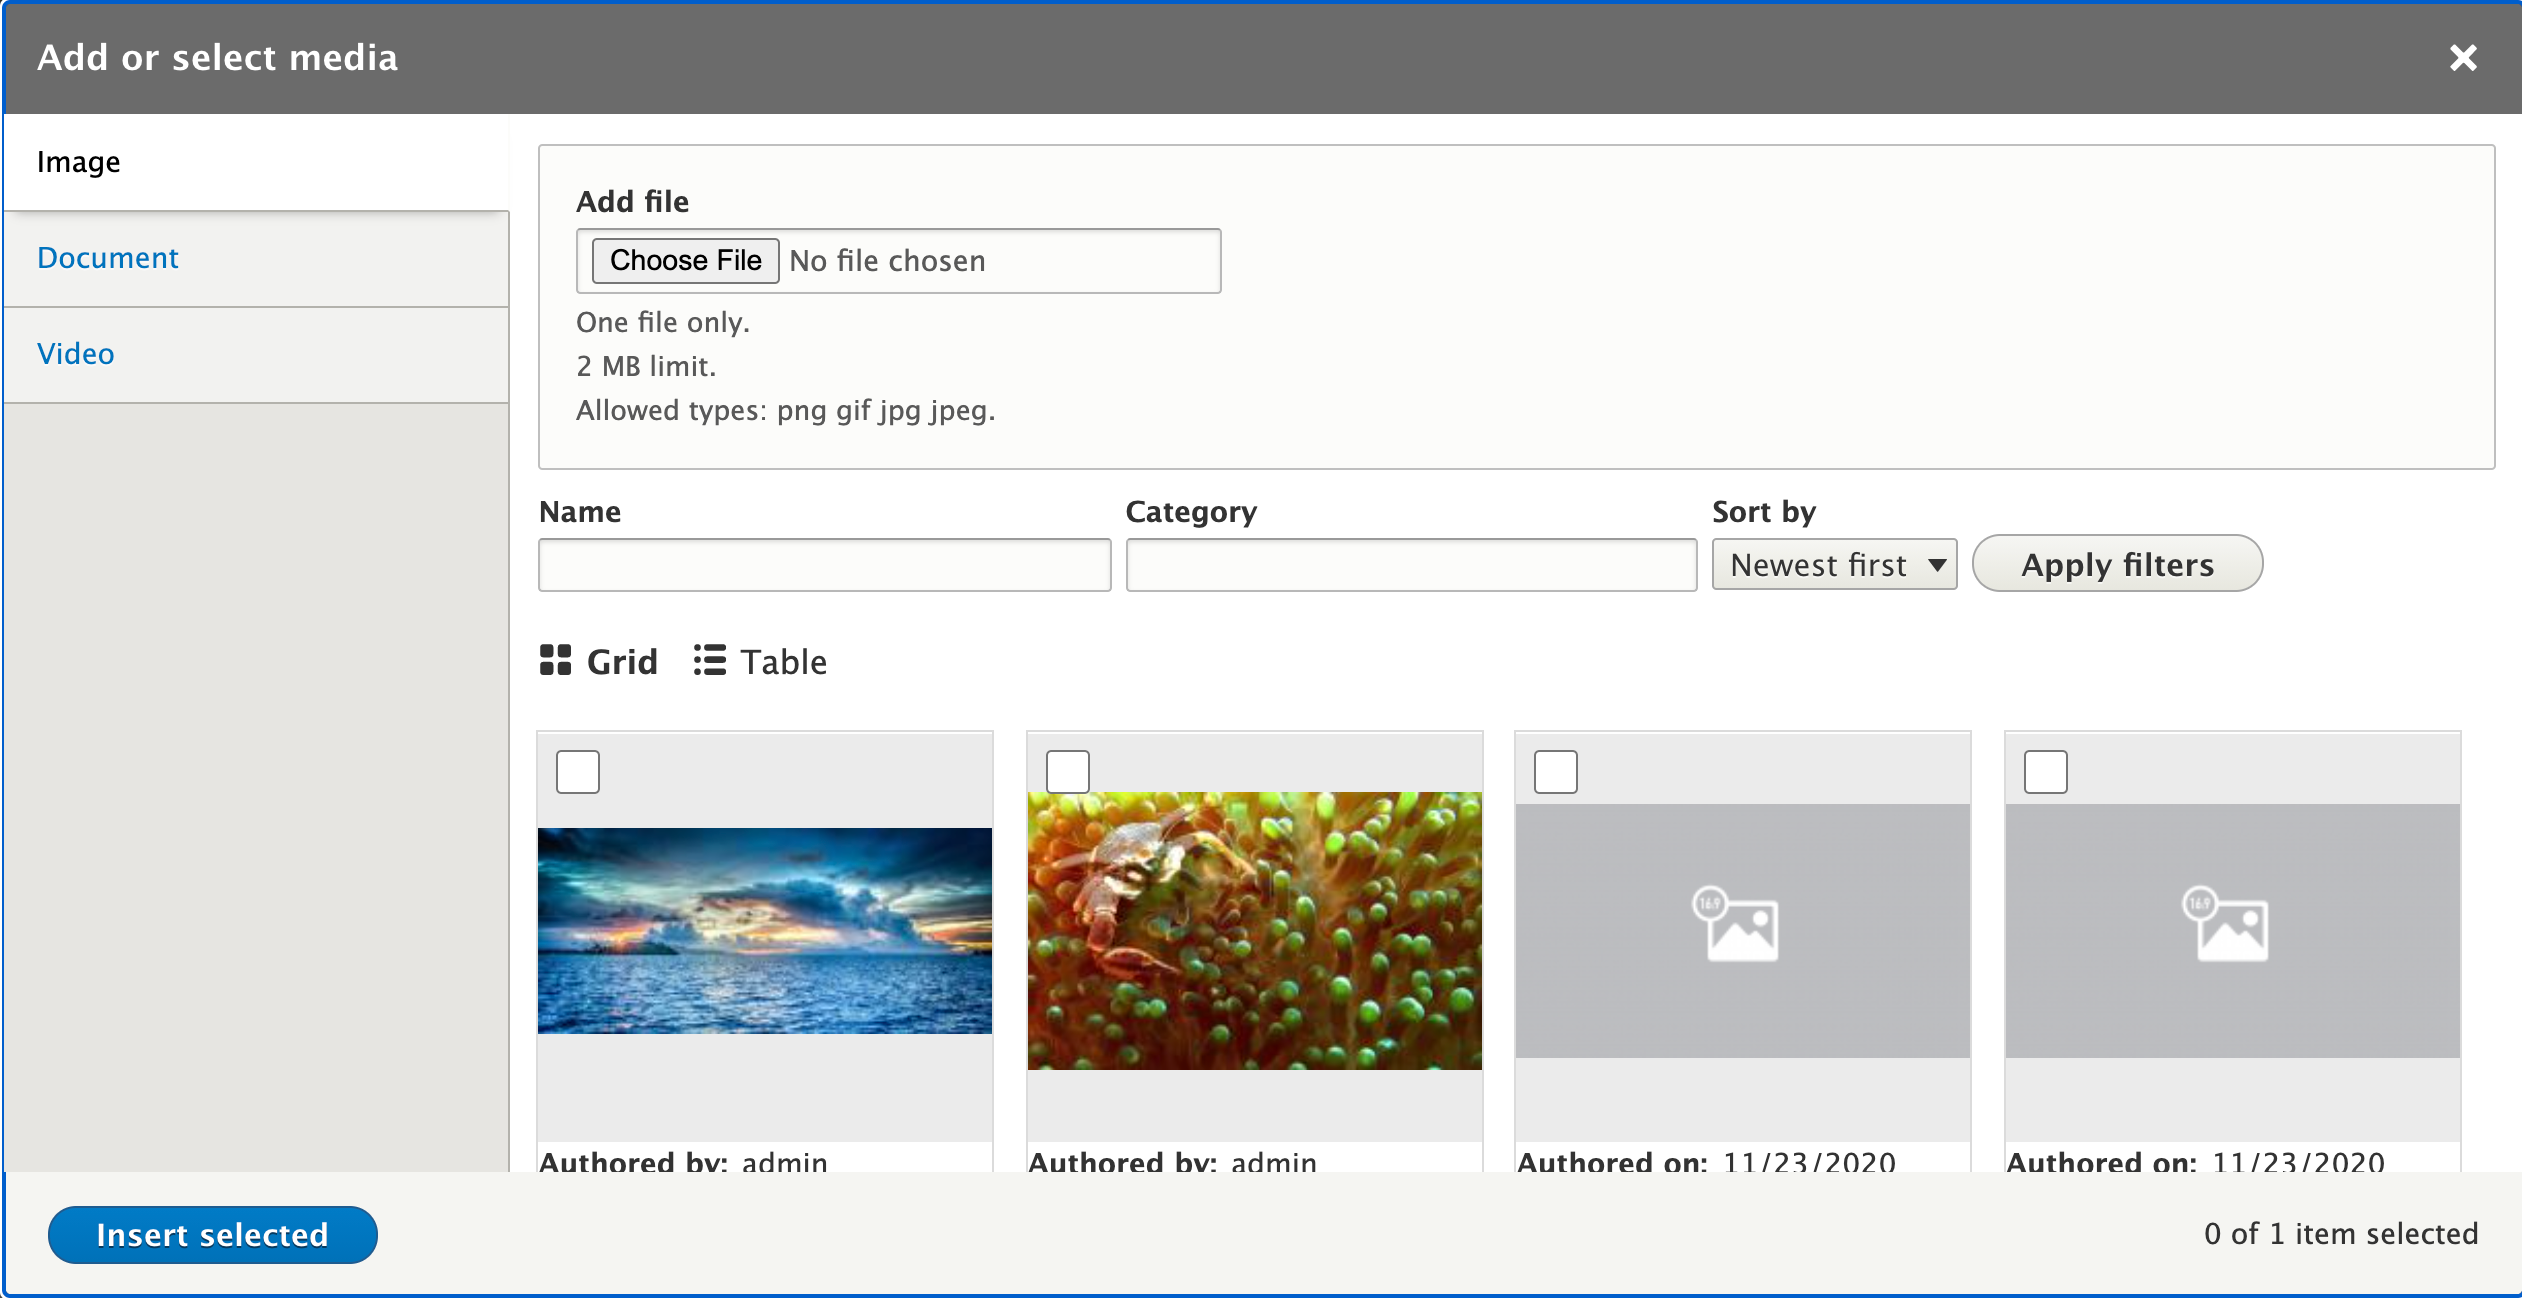 Screenshot of the Add or select media user interface